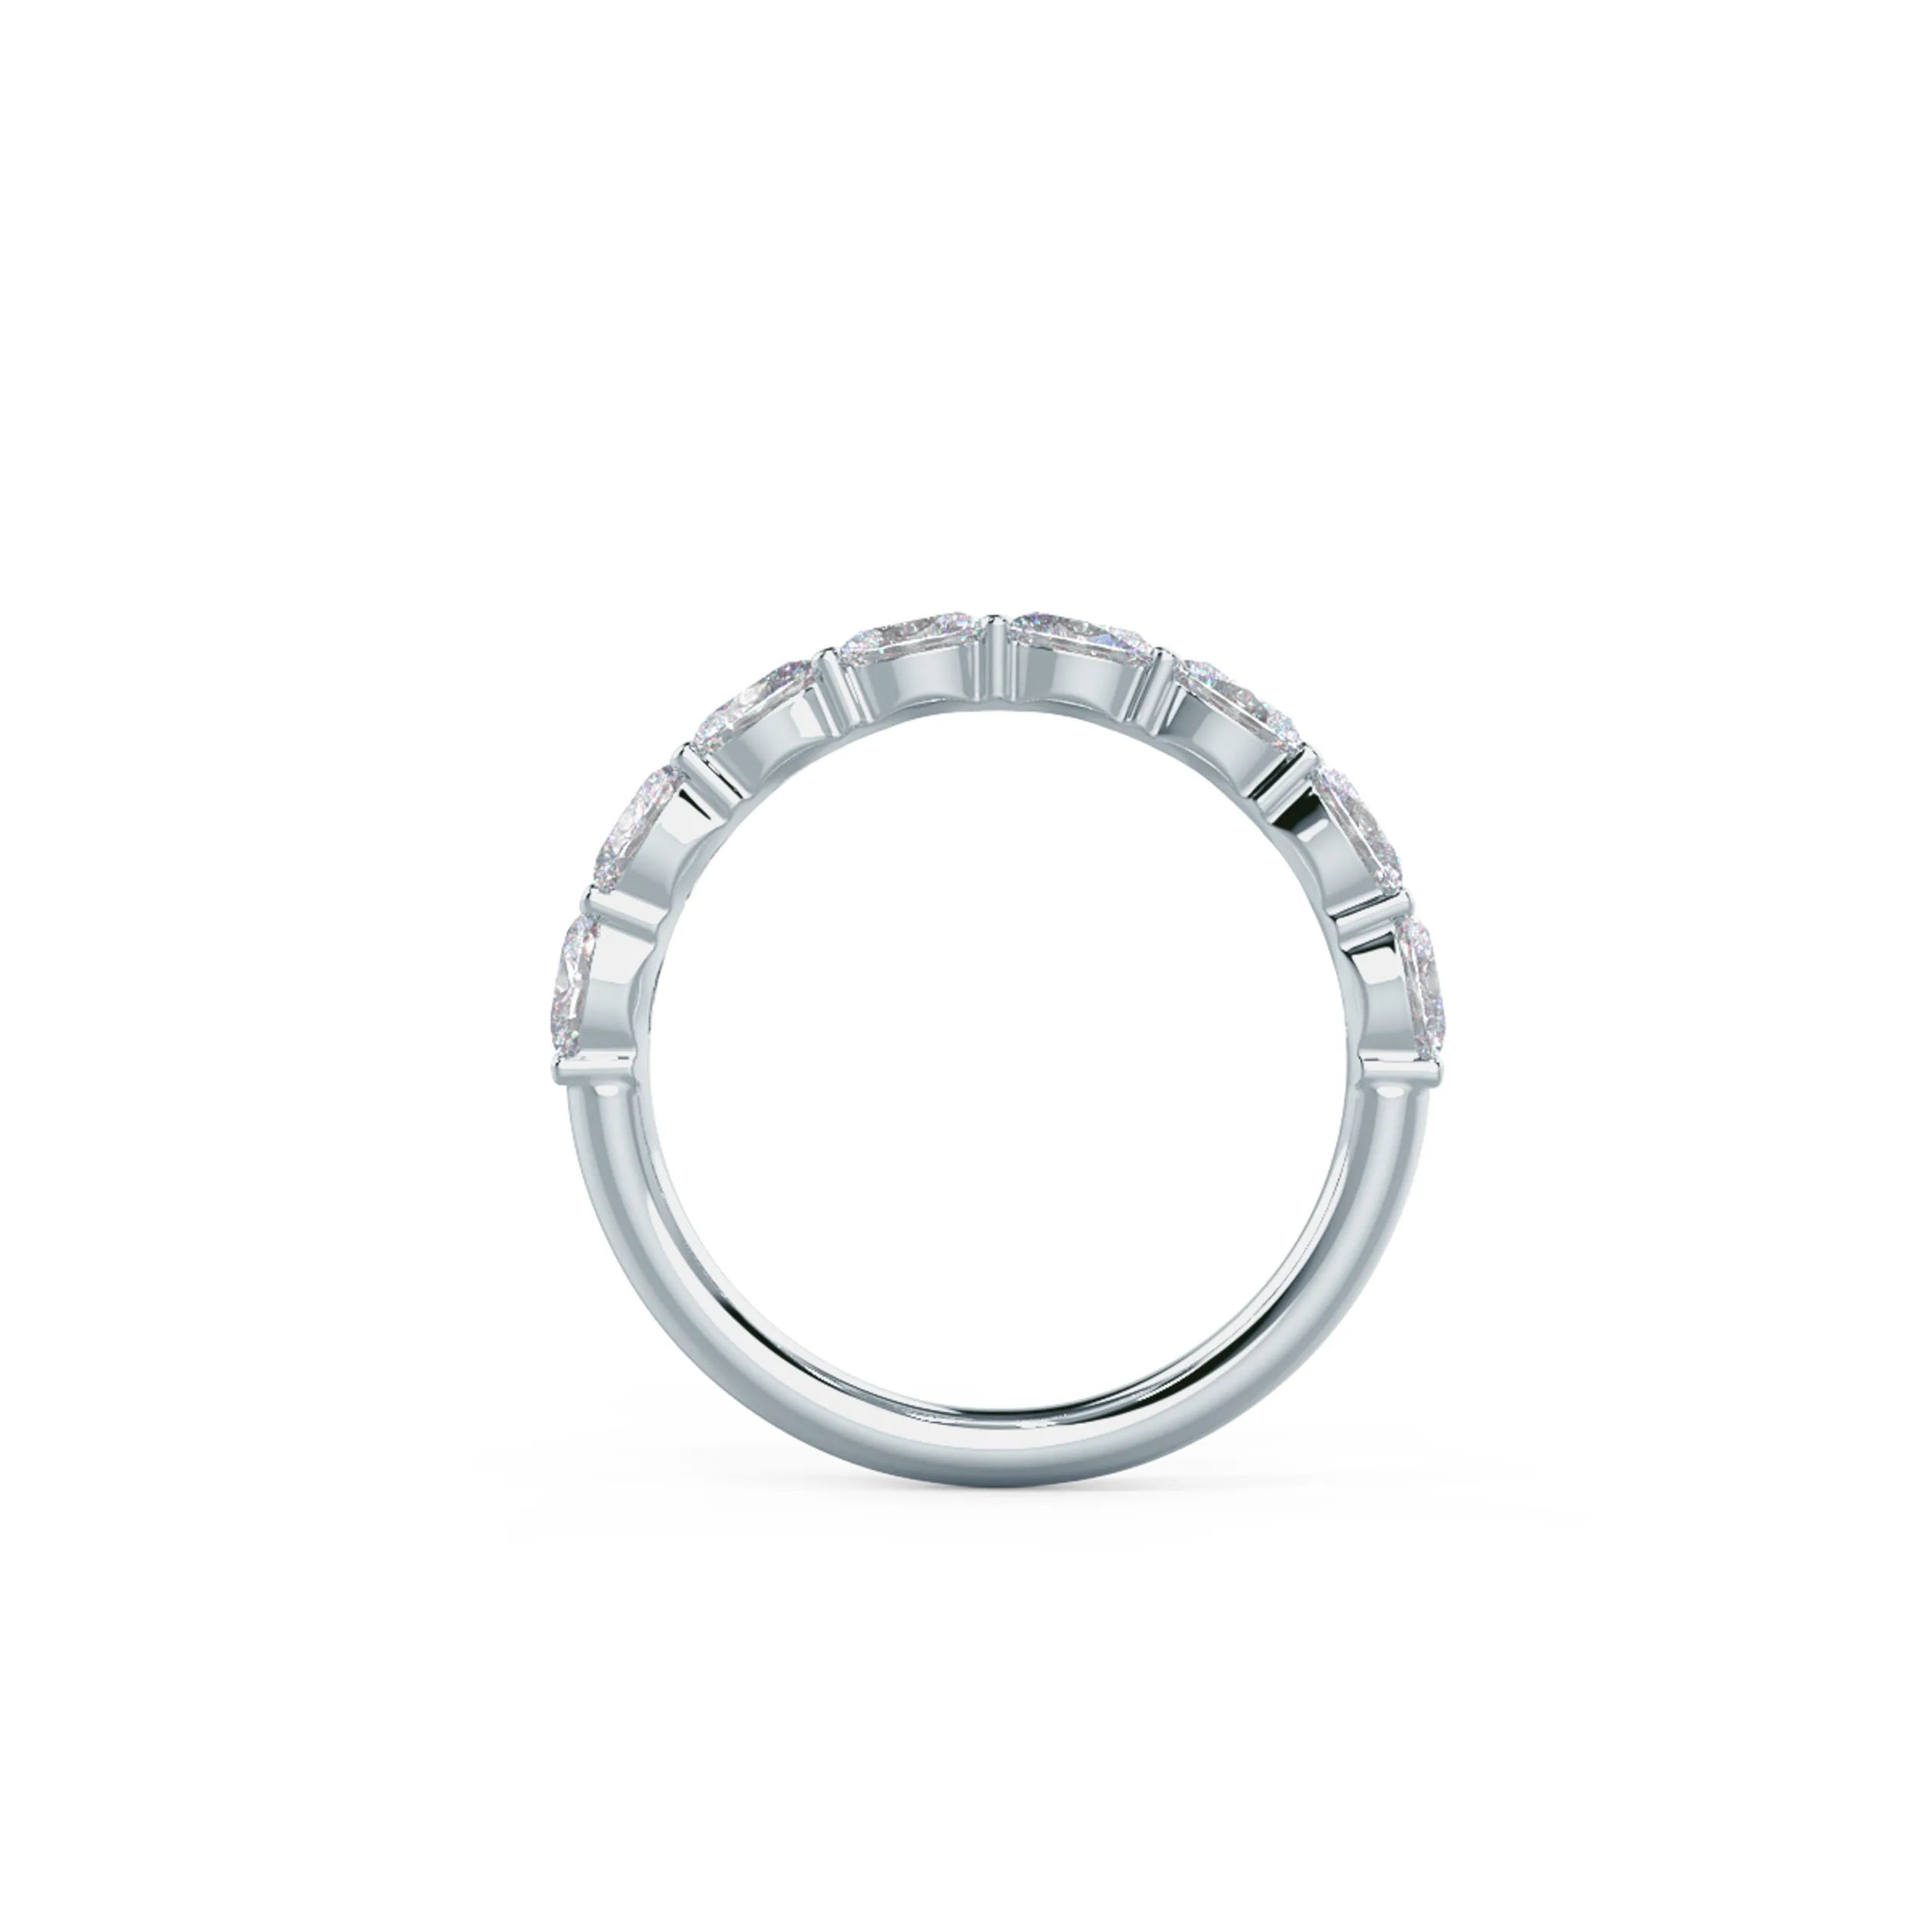 Hand Selected 0.8 Carat Man Made Diamonds set in White Gold Oval East-West Half Band (Profile View)